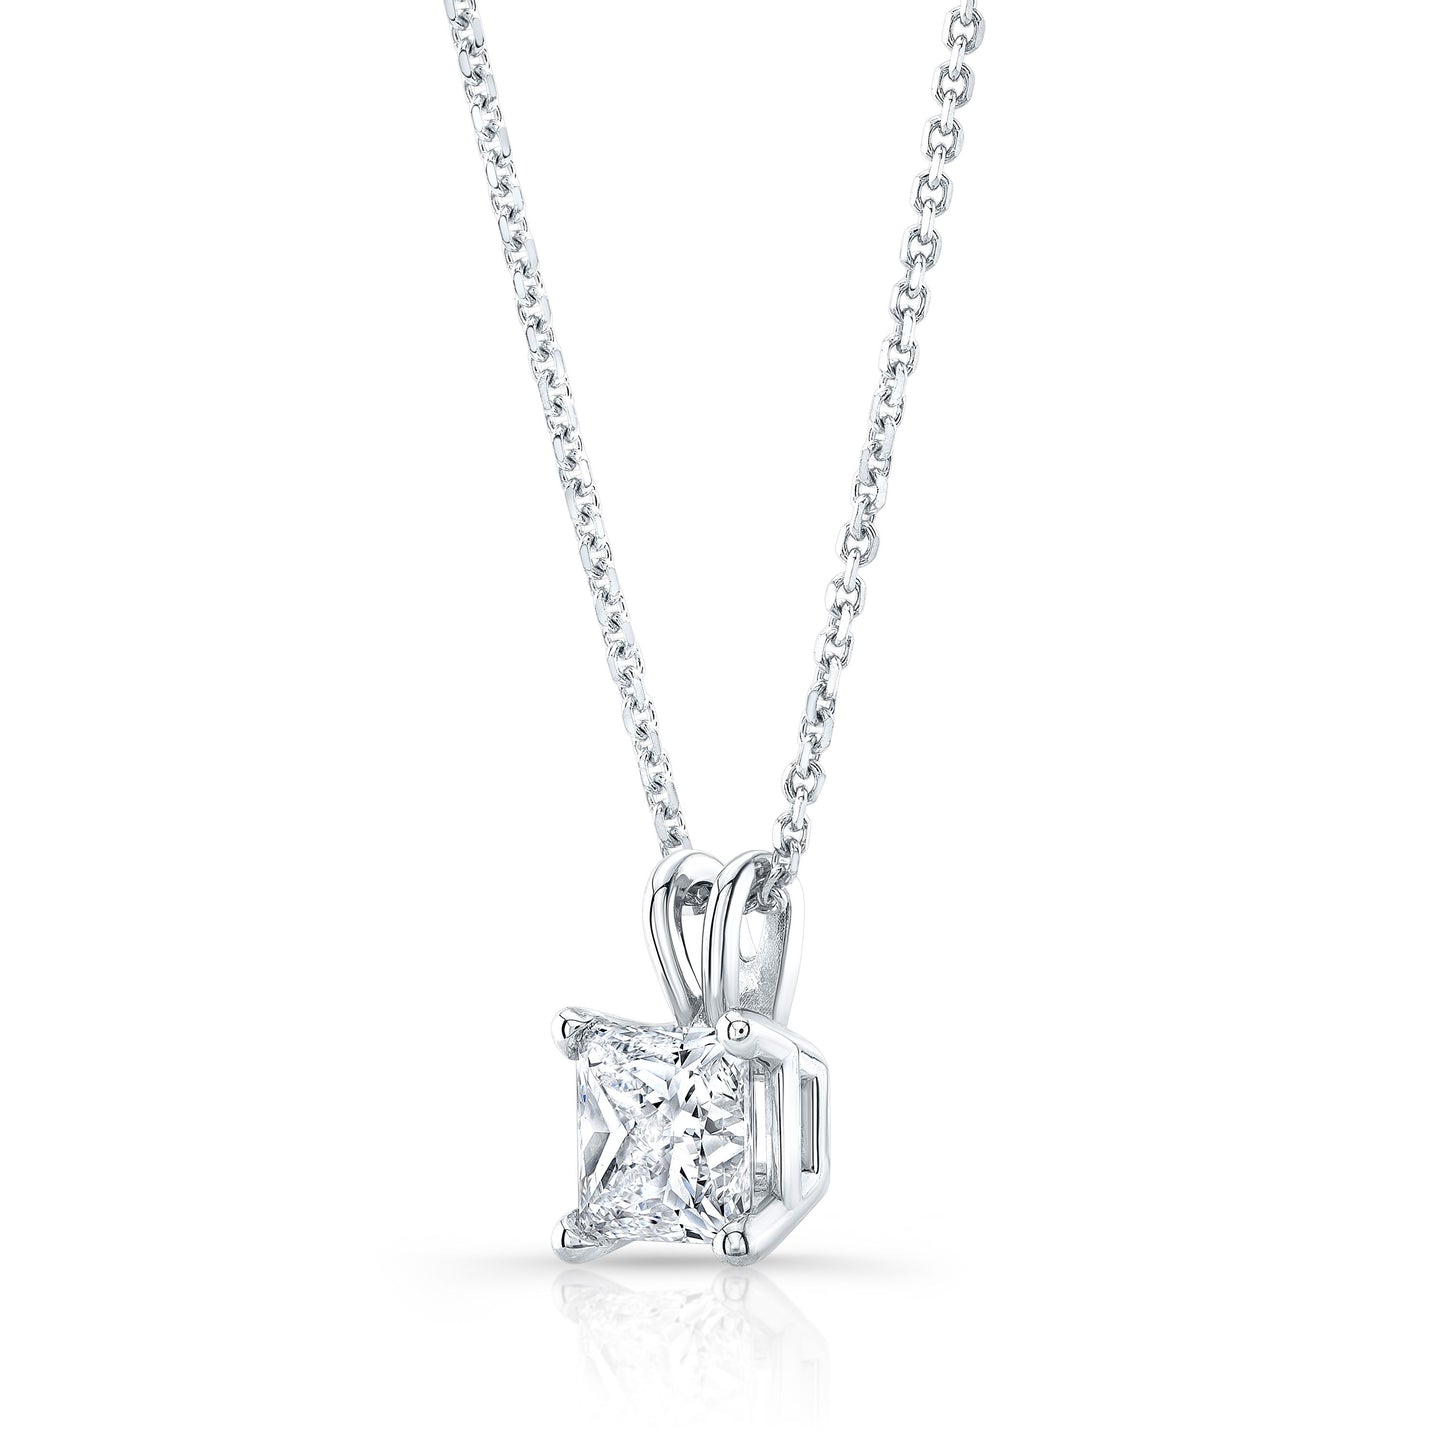 Princess Diamond Solitaire Pendant In A 14k White Gold 4-prong Basket Setting, 1.5ct. T.w. (hi, Si1-si2)